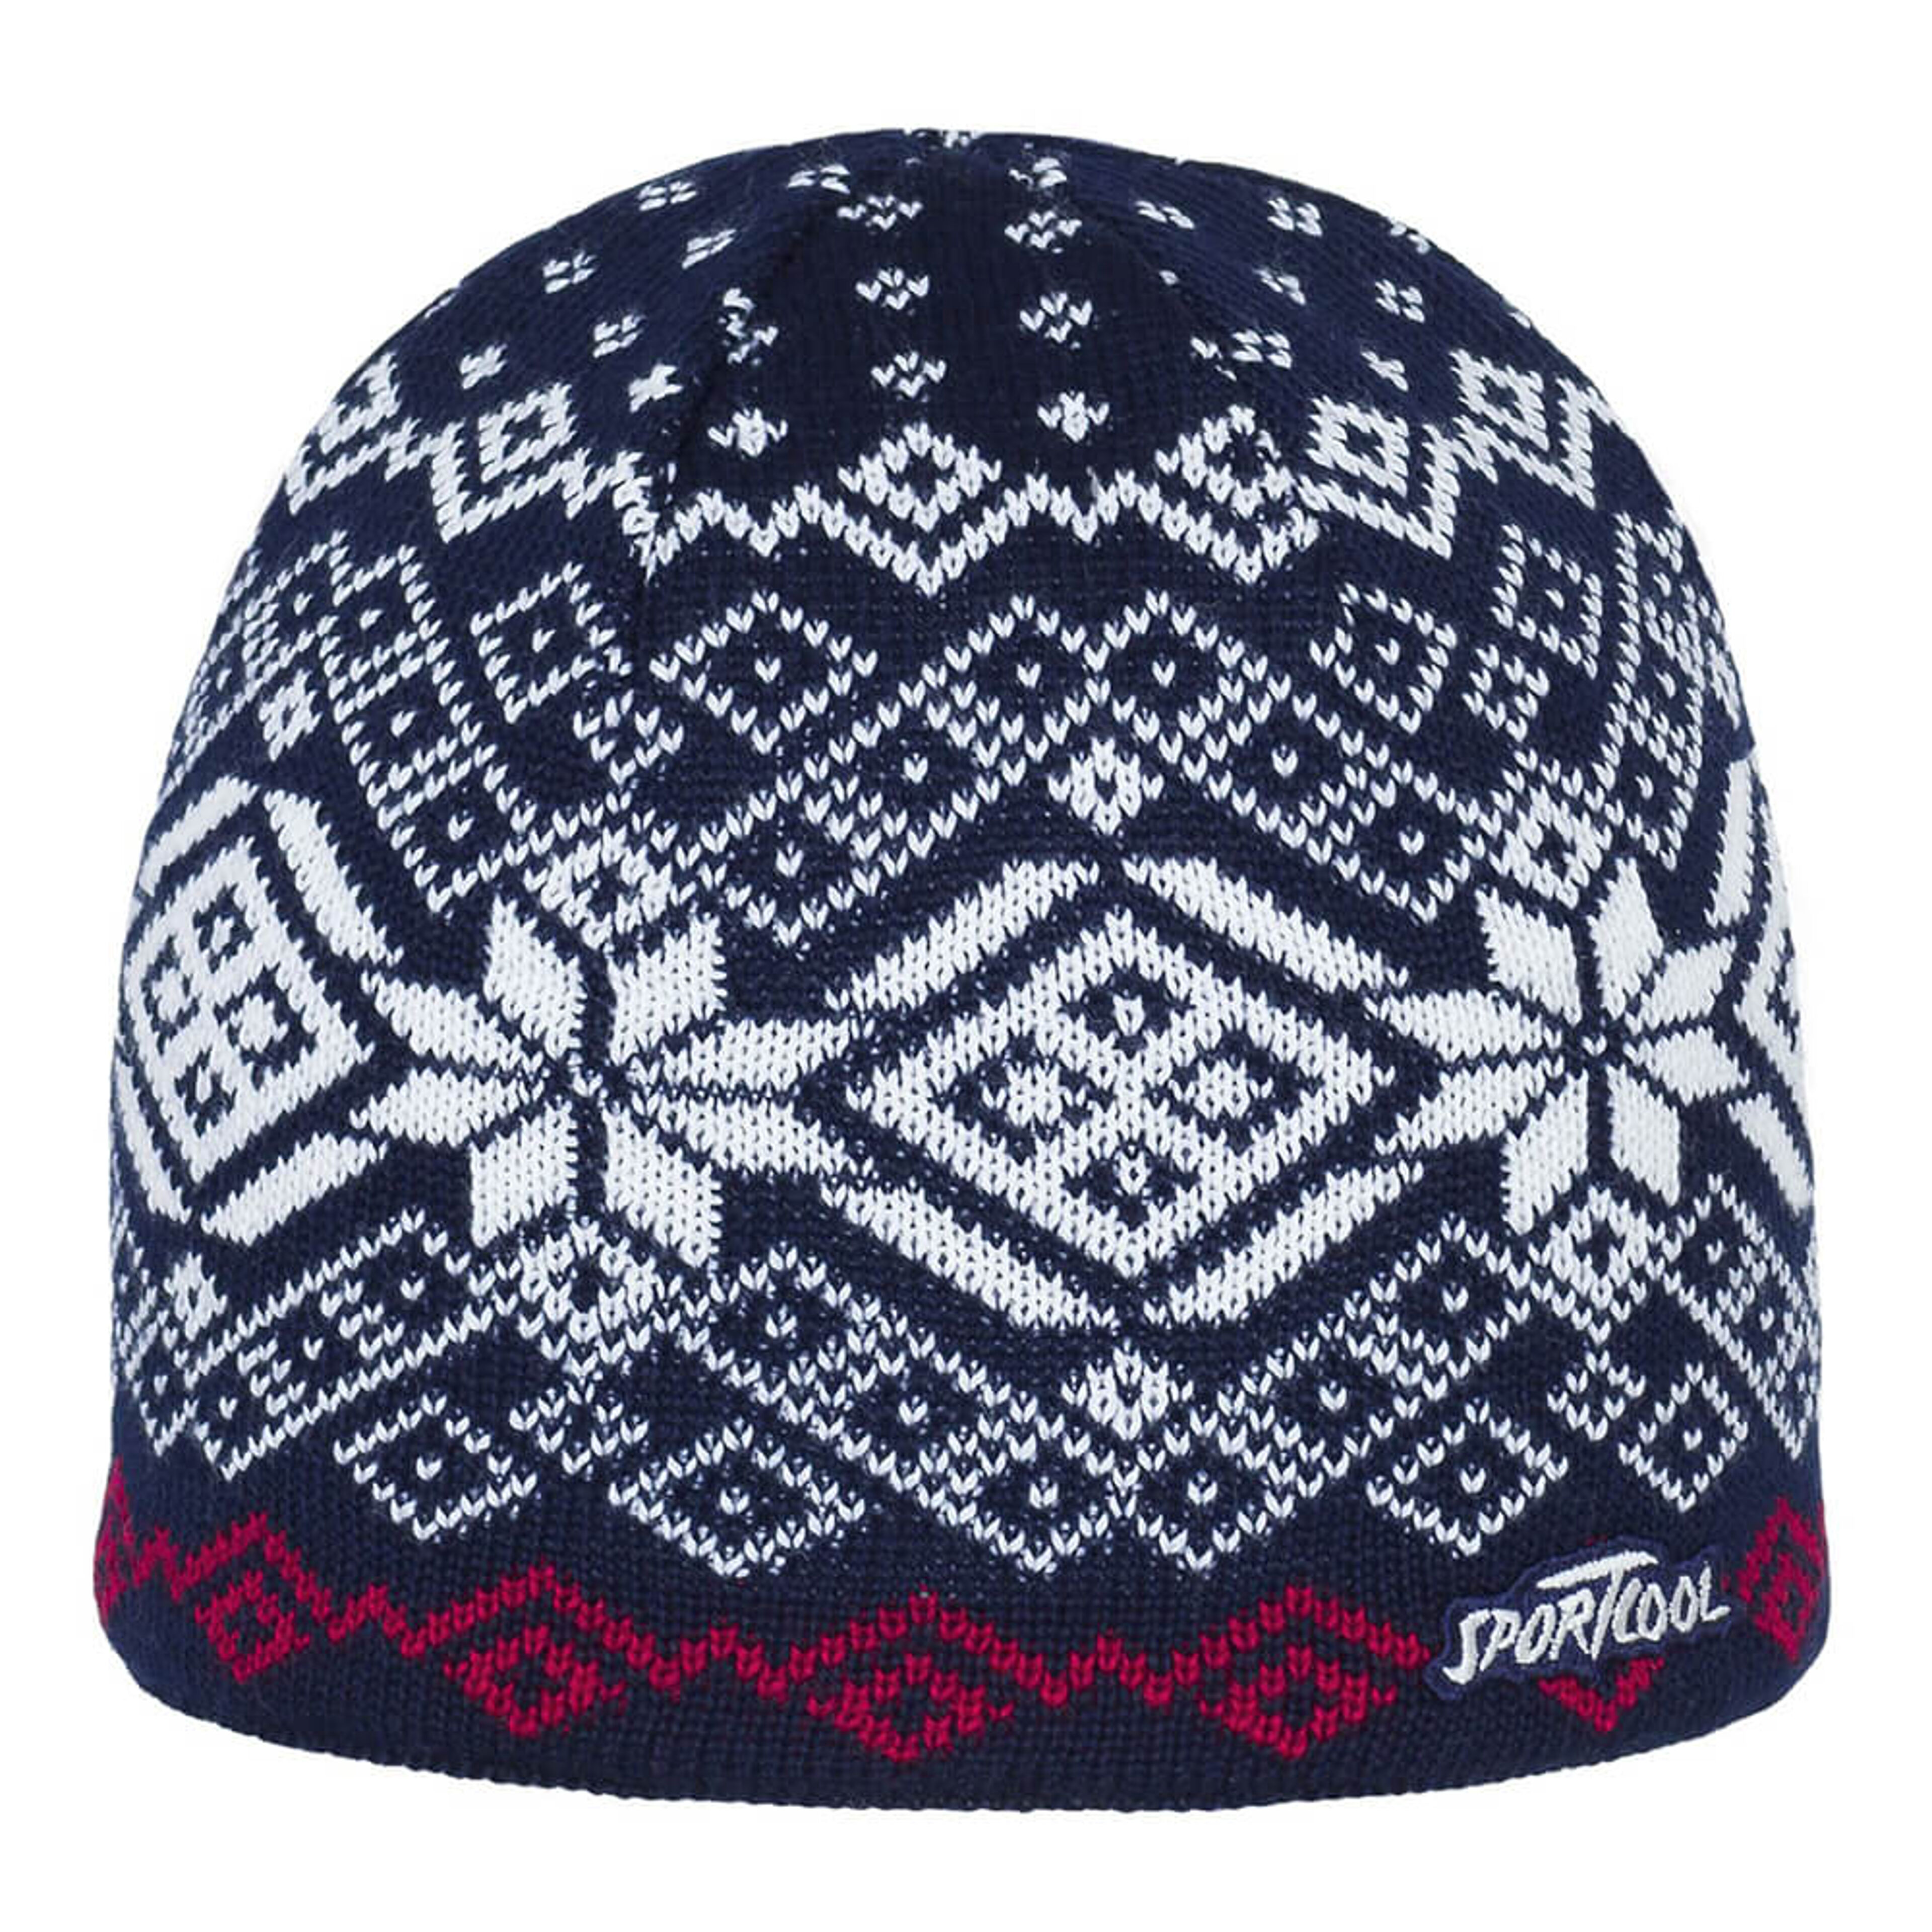 SportCool Men's Beanie with Classic Norwegian pattern (249)